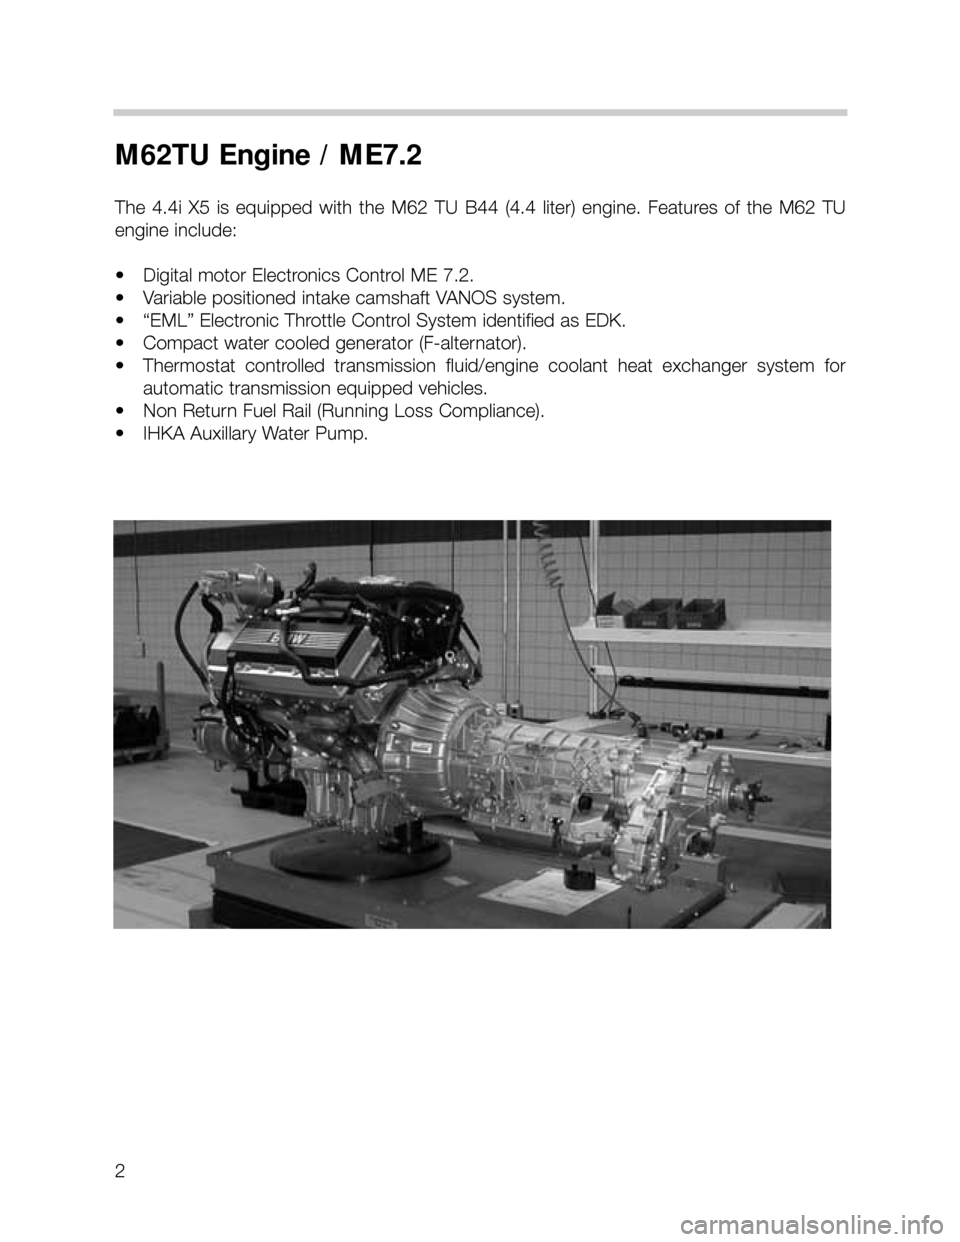 BMW X5 2000 E53 M62TU Engine Workshop Manual 2
M62TU Engine / ME7.2
The 4.4i X5 is equipped  with  the  M62  TU  B44  (4.4  liter)  engine.  Features  of  the  M62  TU
engine include:
• Digital motor Electronics Control ME 7.2.
• Variable po